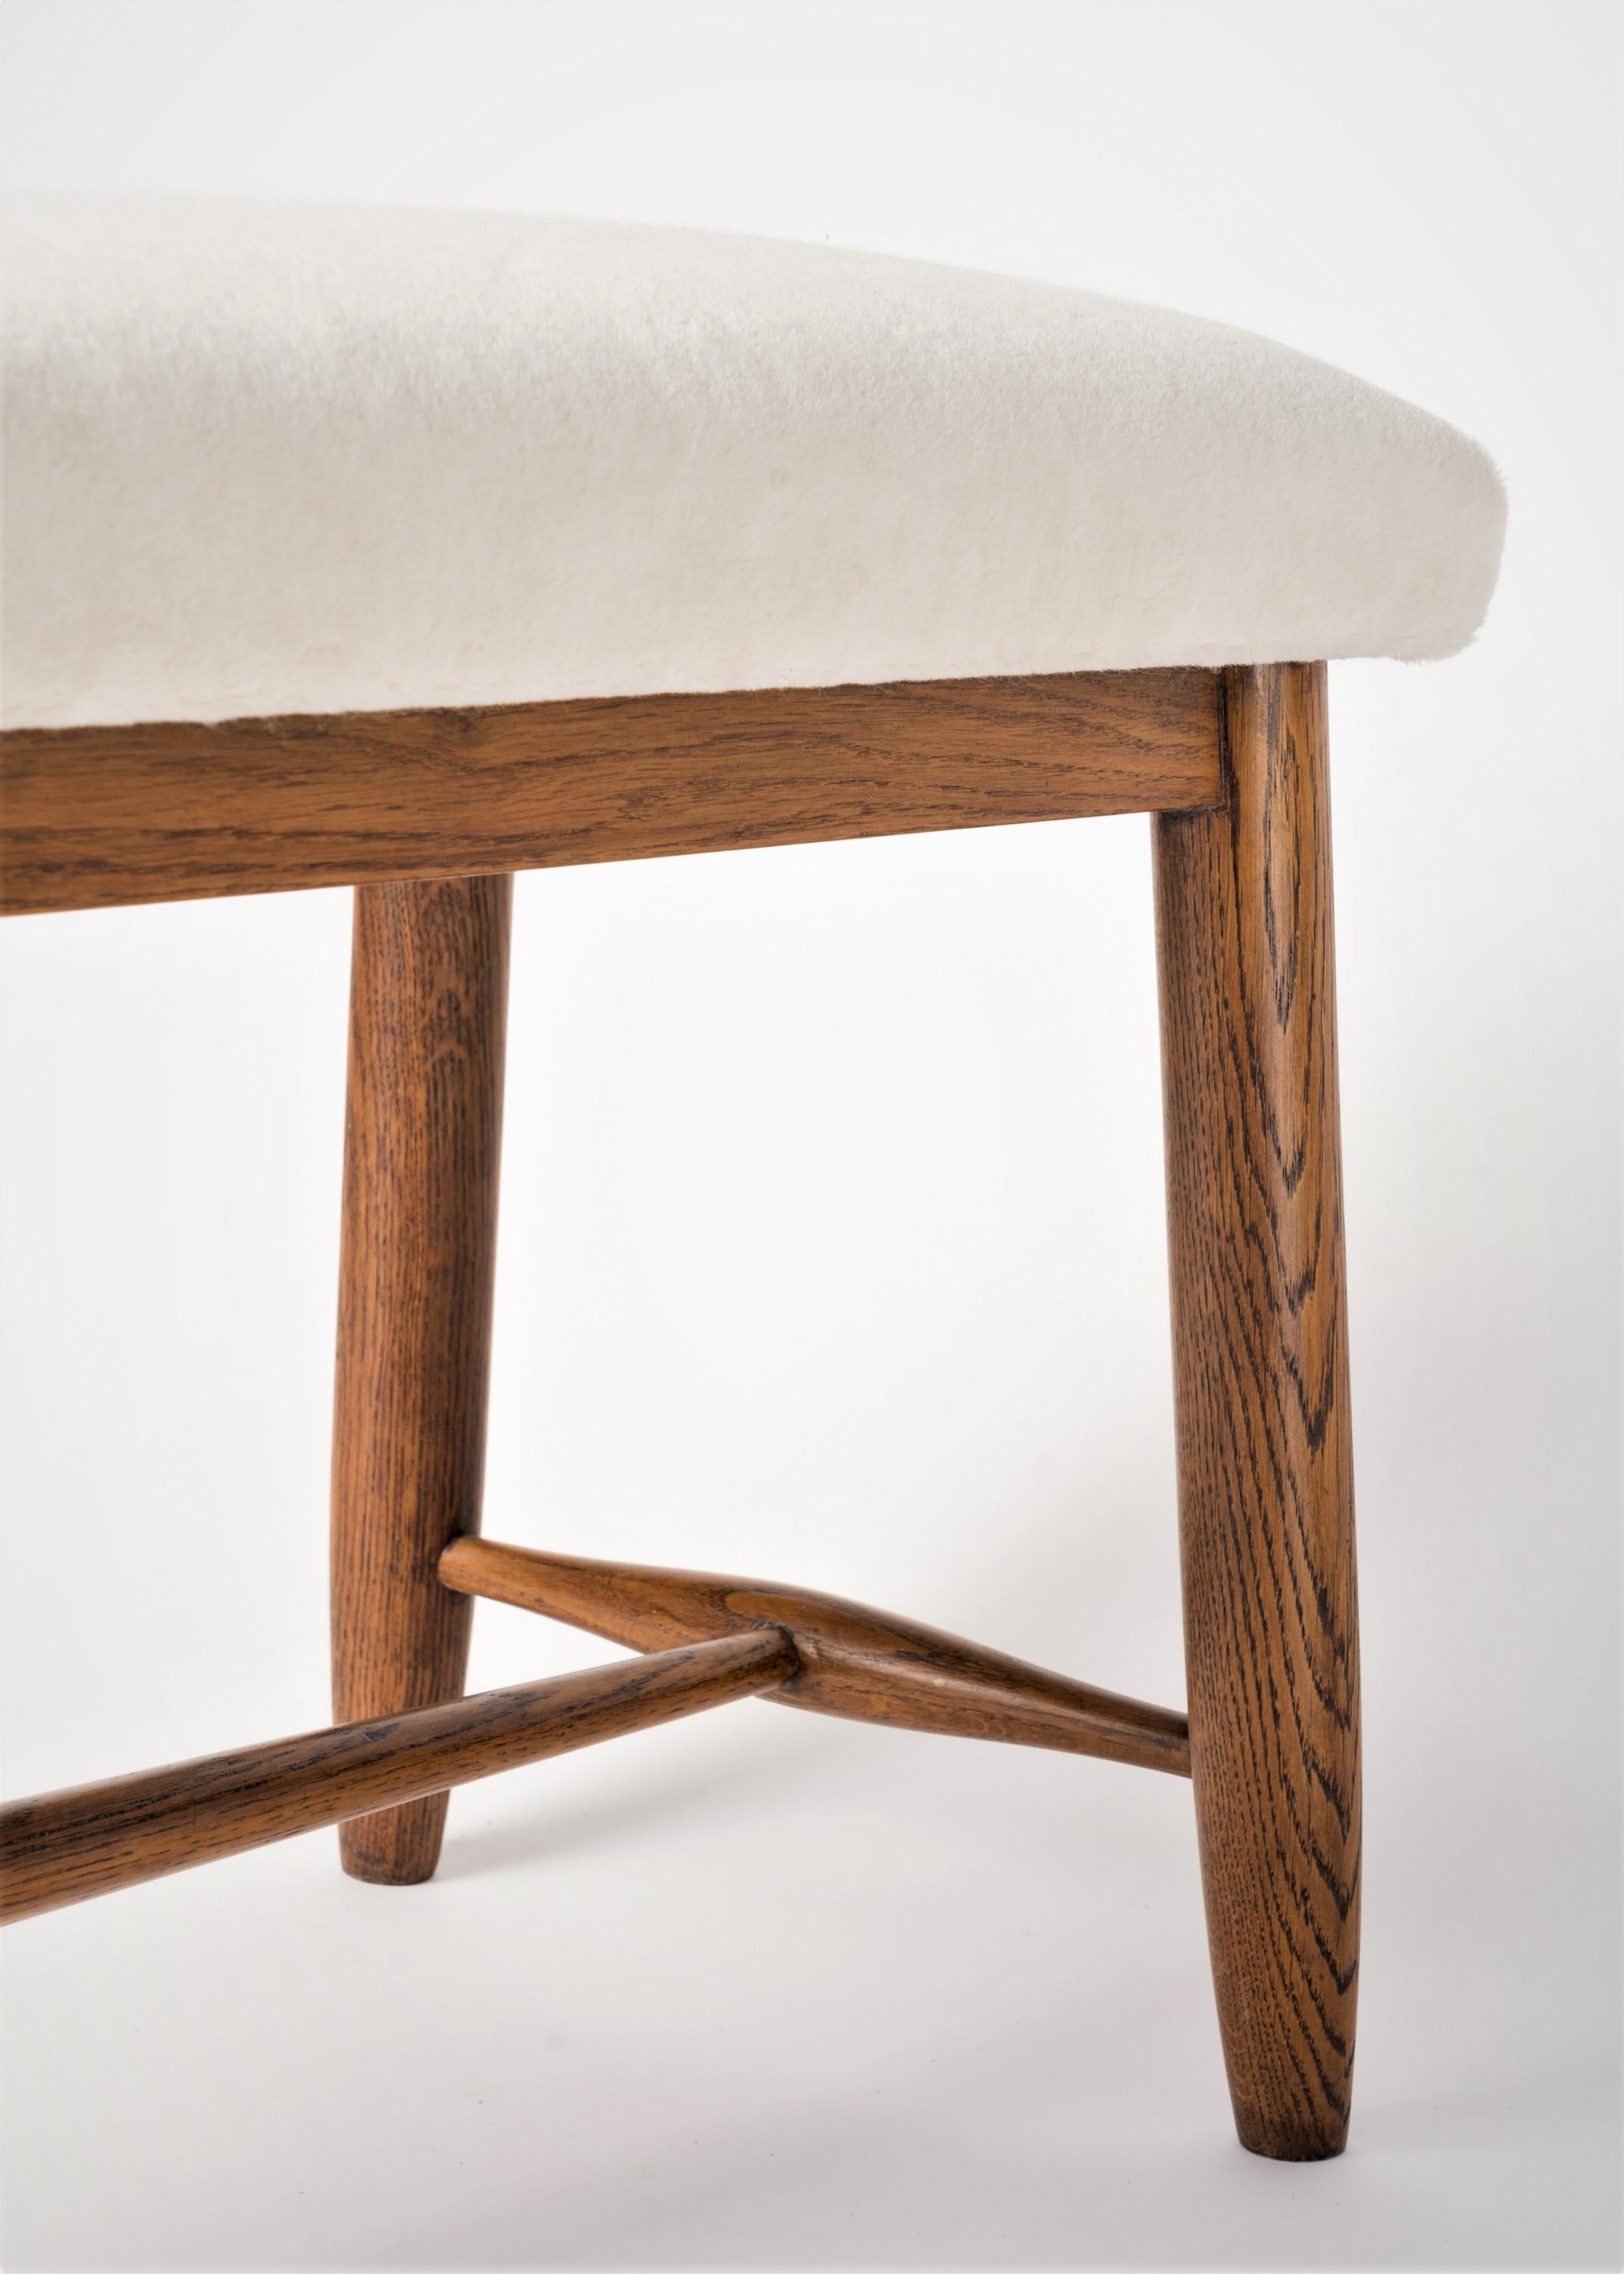 French Reconstruction Solid Oak and Off-White Frey Mohair Bench, France, 1950's For Sale 3